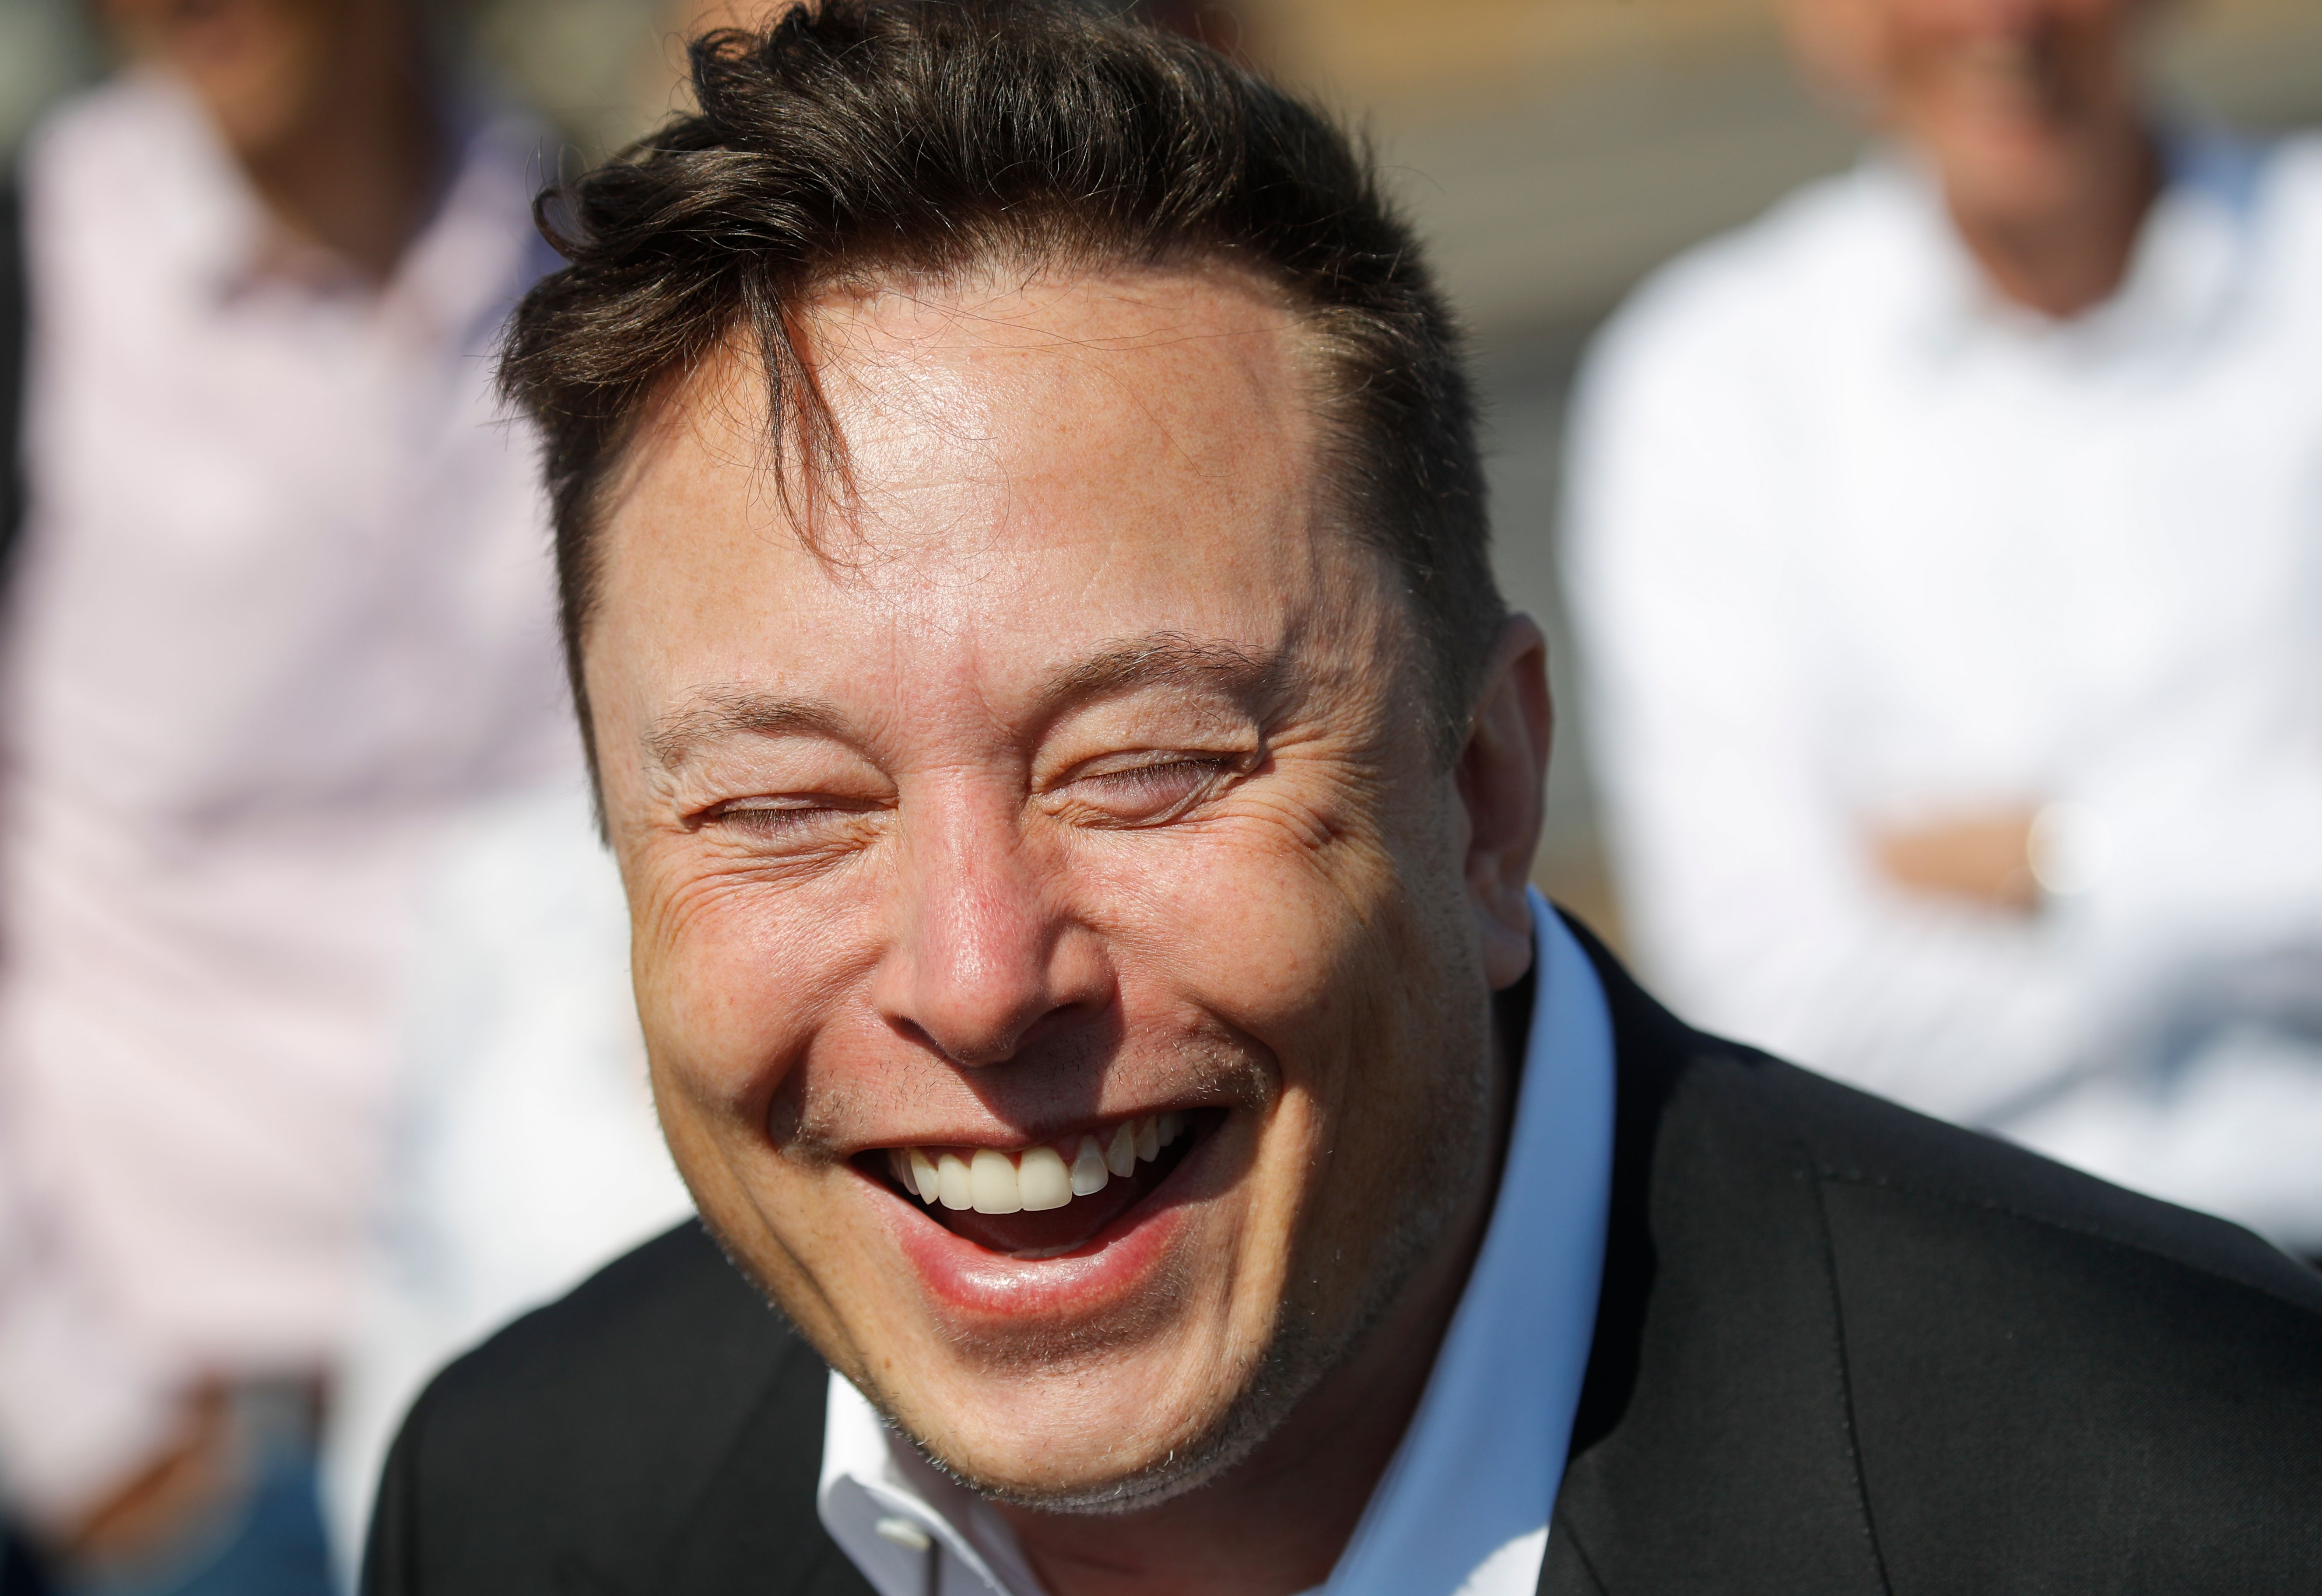 Tesla CEO Elon Musk laughs as he talks to media as he arrives to visit the construction site of the future US electric car giant Tesla, on September 03, 2020 in Gruenheide near Berlin. | Source: Getty Images